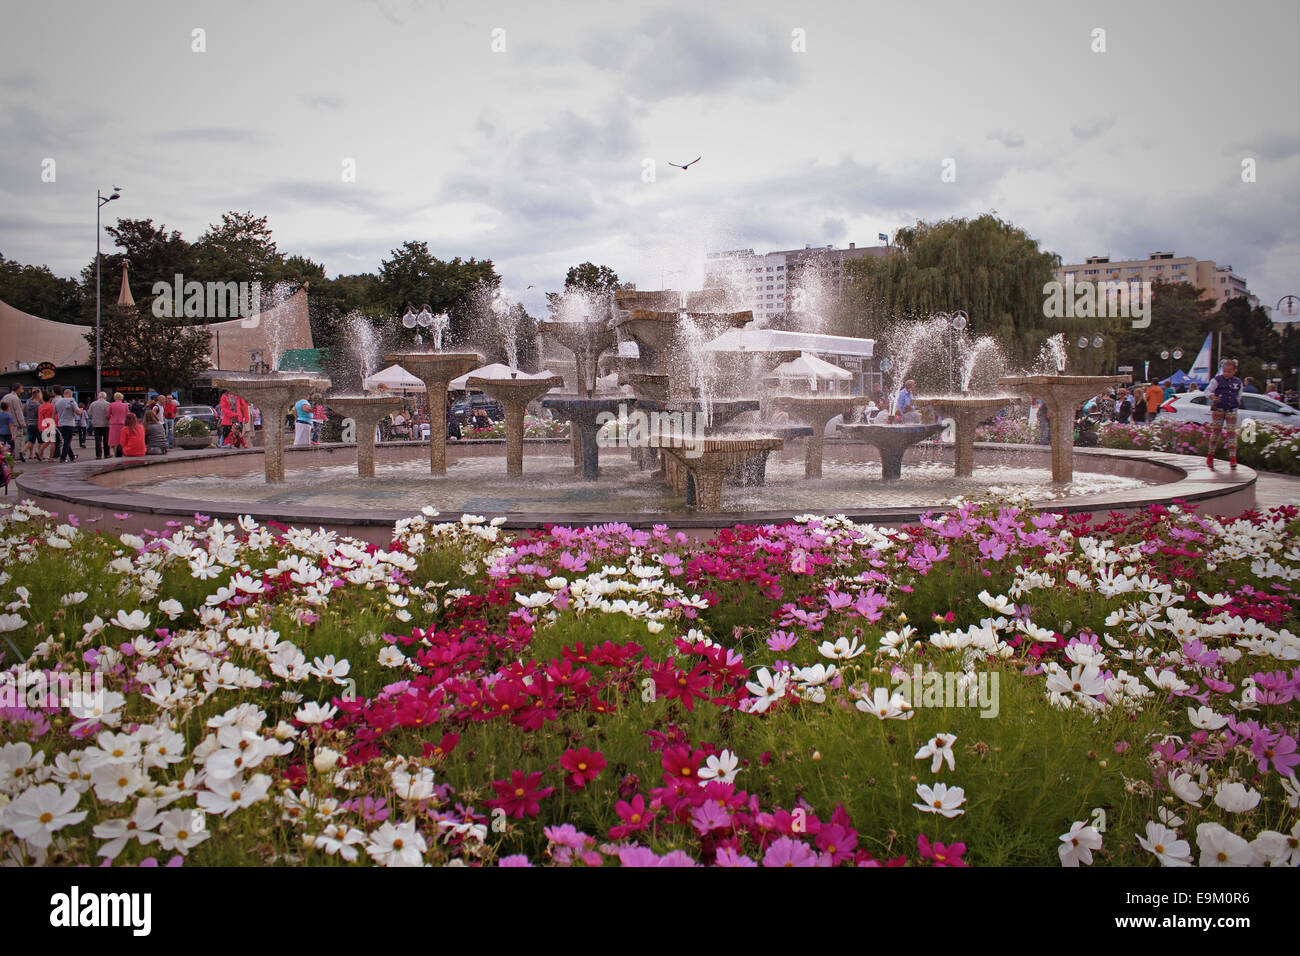 Poland, Gdynia August 17, 2014: Flowers bloom in front of Gdynia fountain on the Kosciuszko Square. Stock Photo